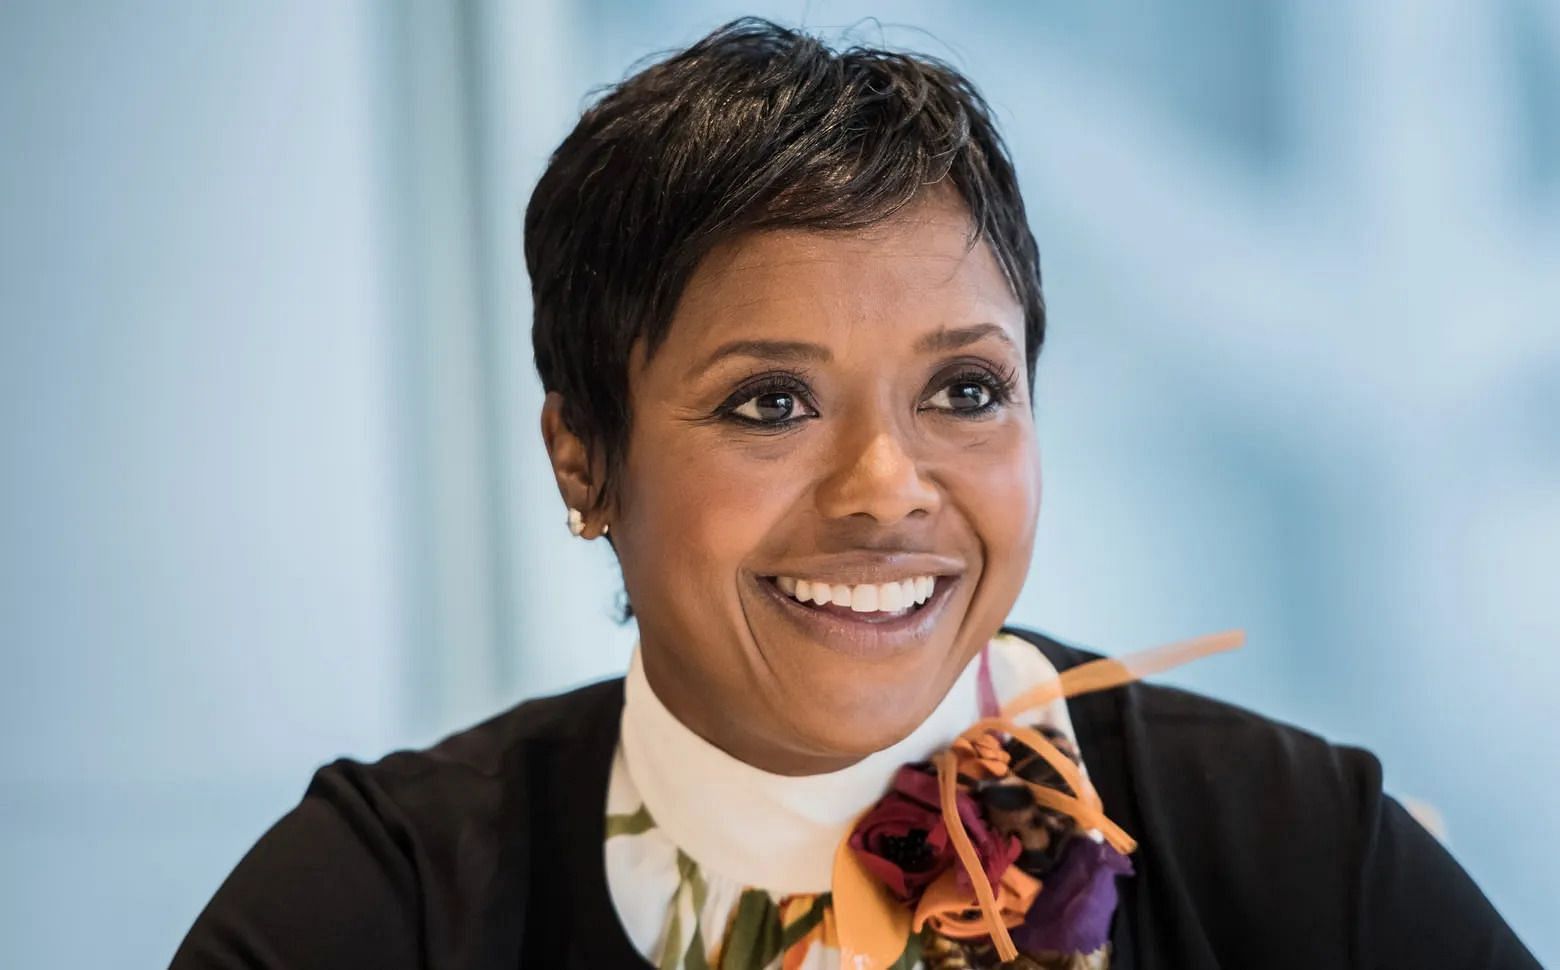 New Denver Broncos co-owner Mellody Hobson. Source: The Seattle Times